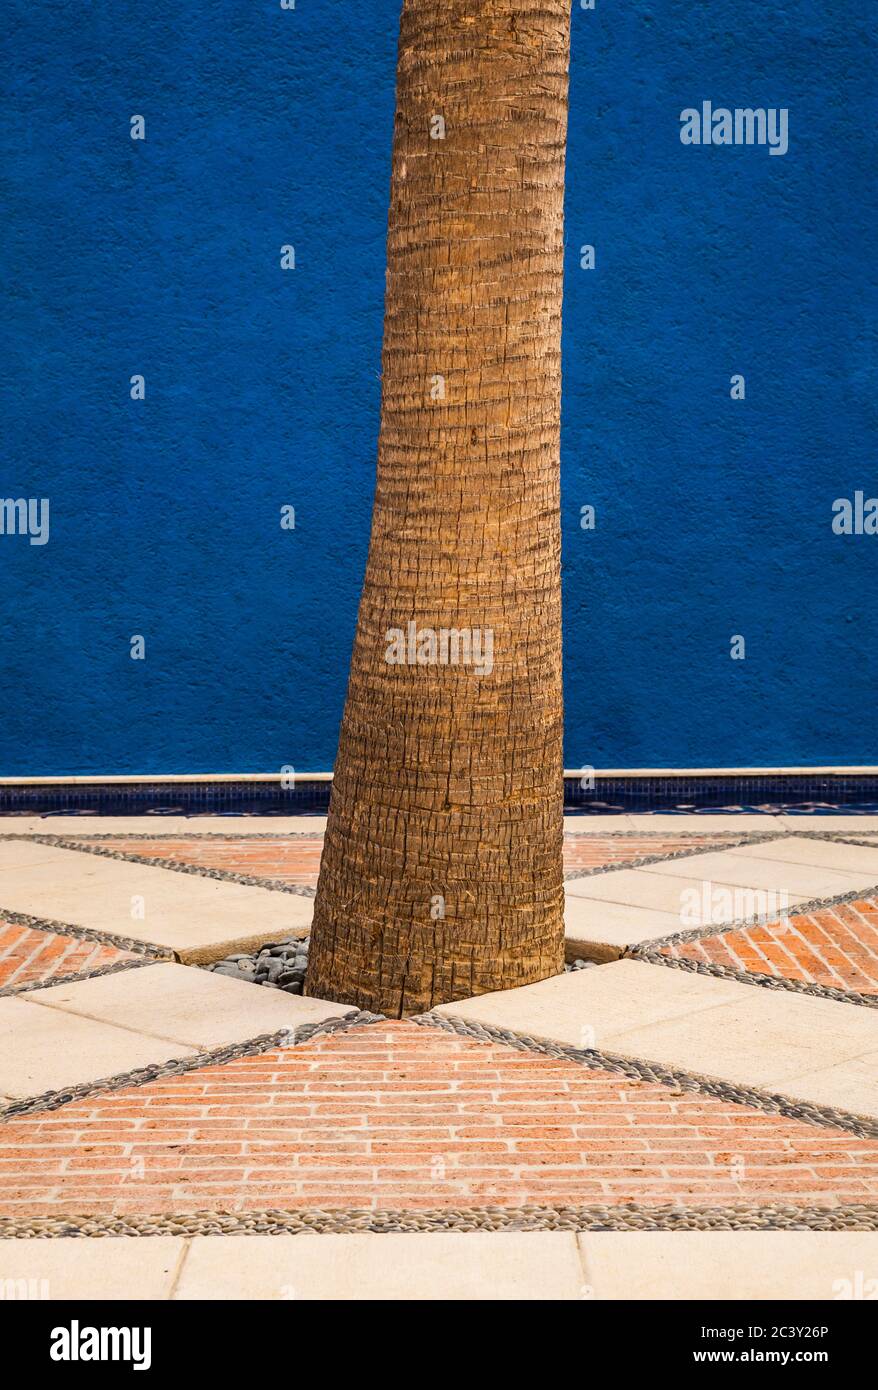 A detail from the courtyard in Hotel Casa Natalia, San Jose del Cabo, B.C.S., Mexico. Stock Photo